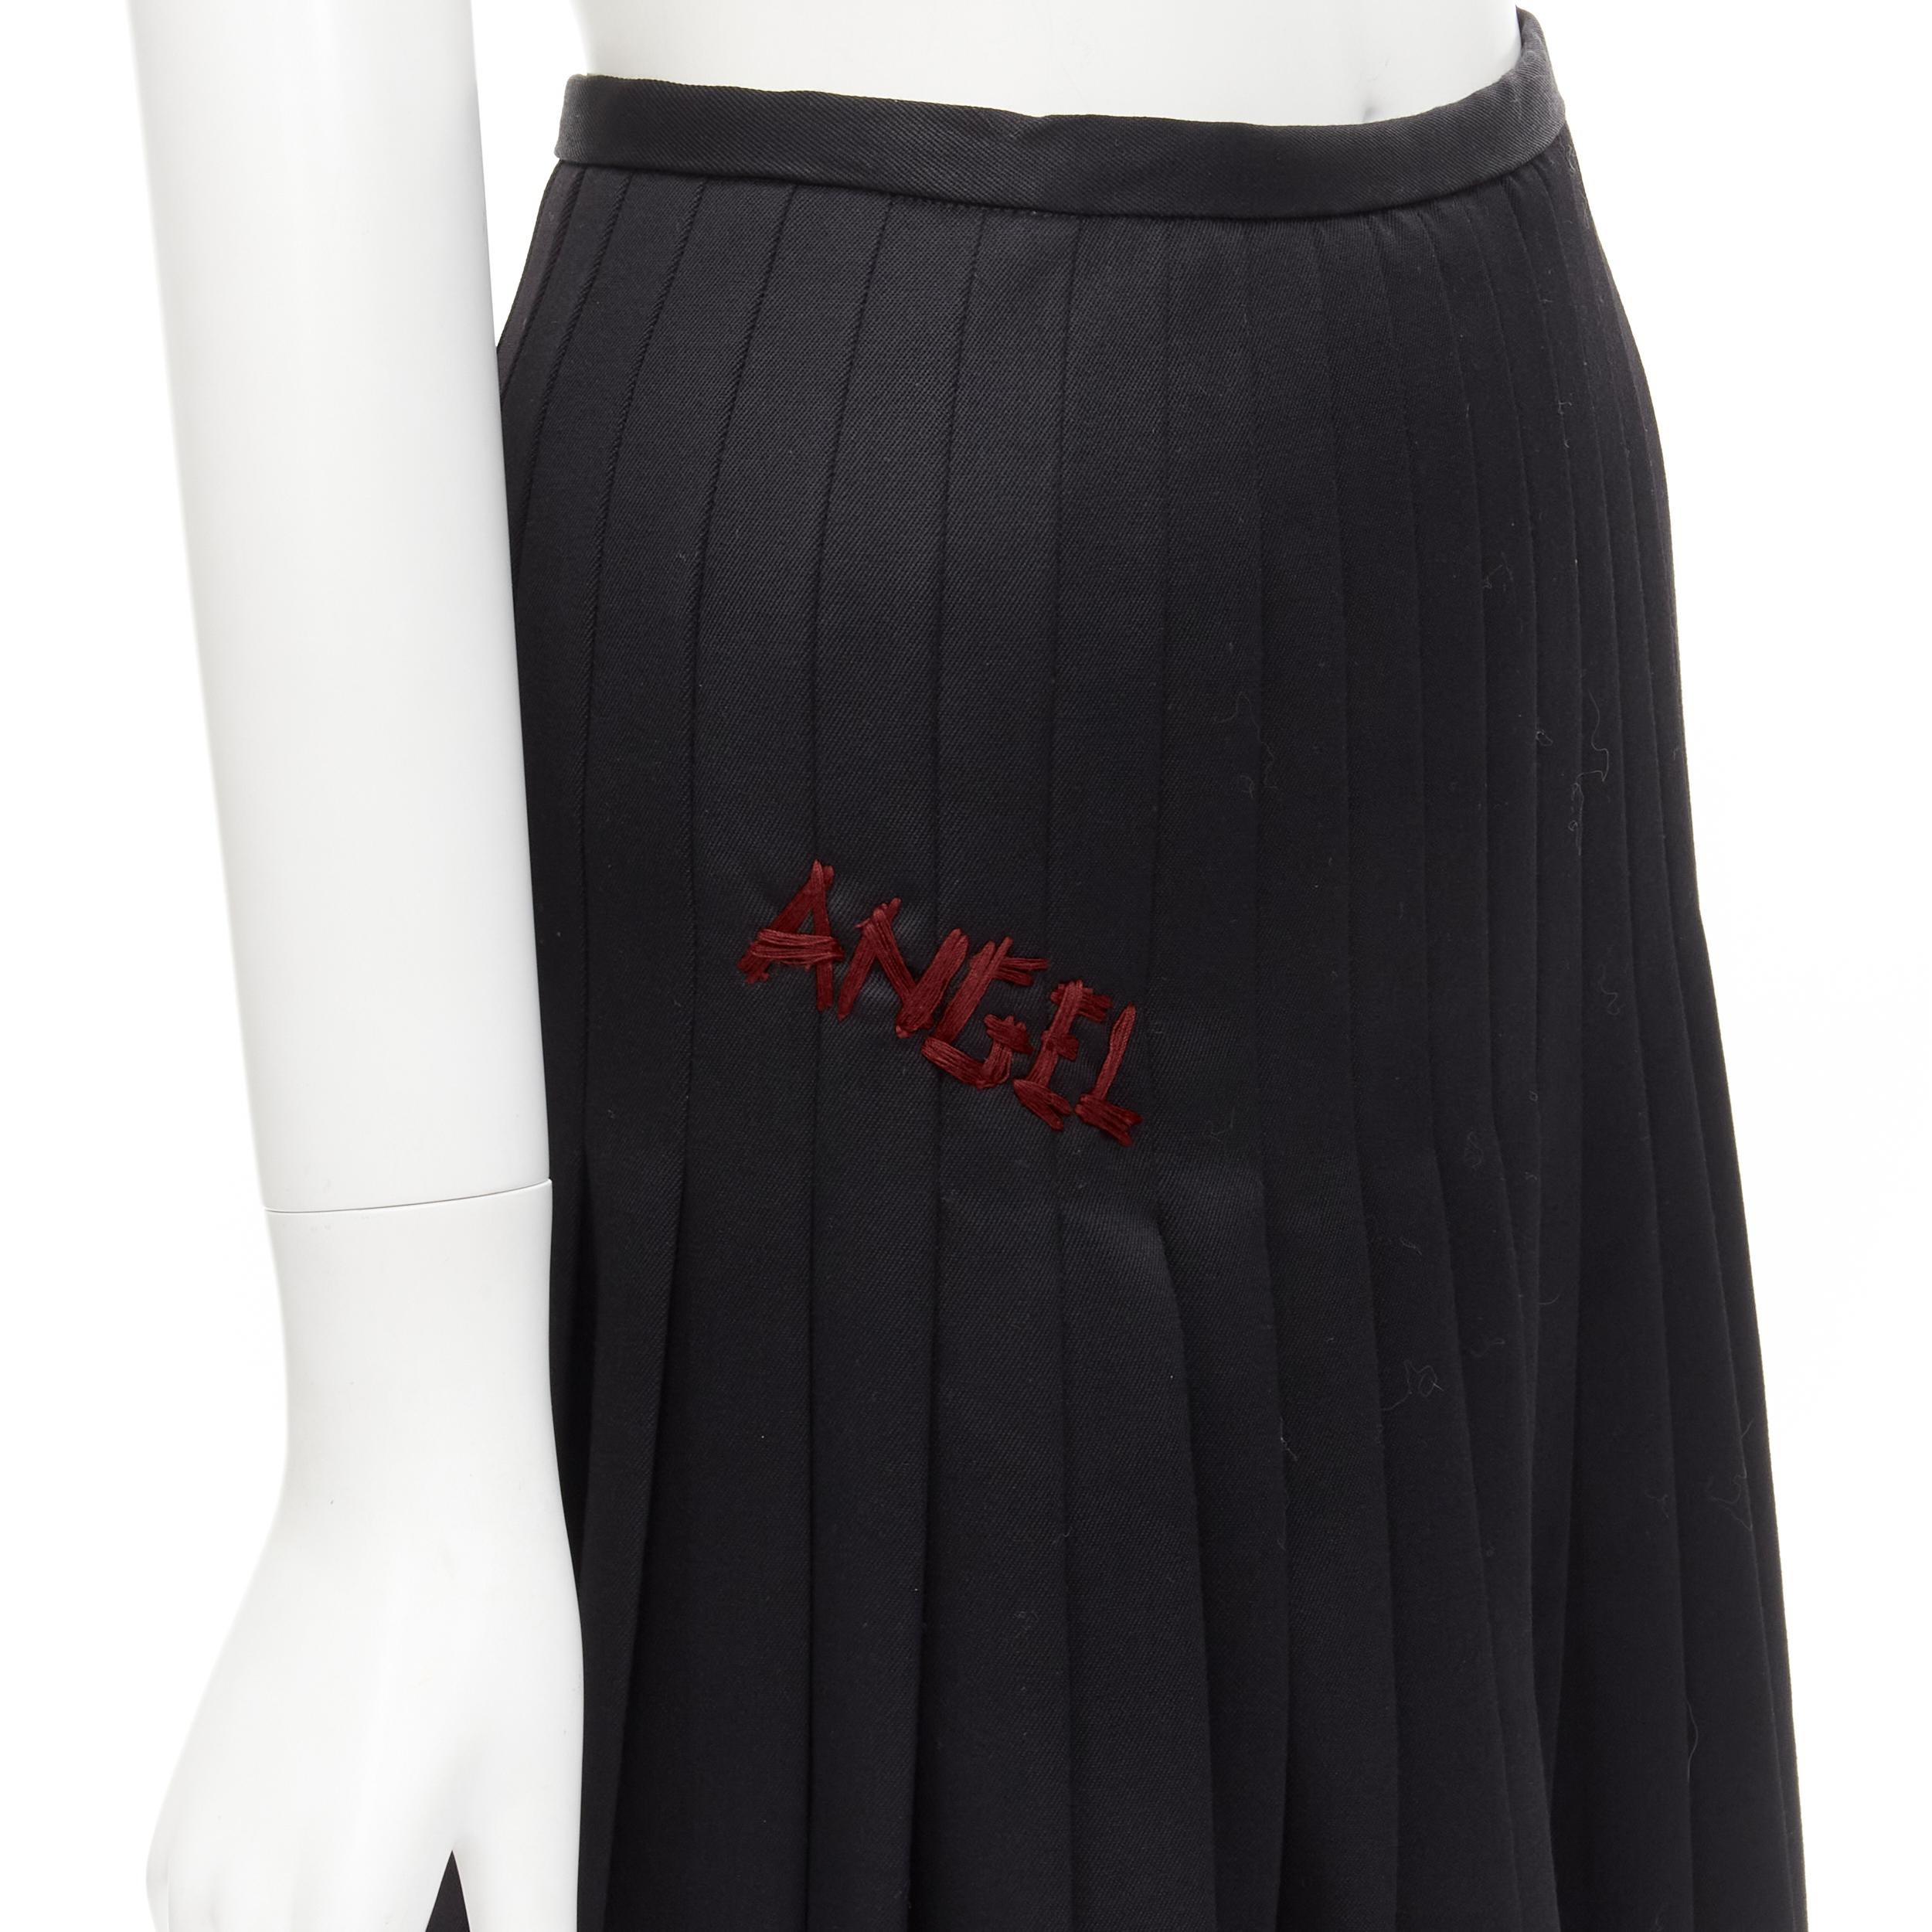 DSQUARED2 red ANGEL embroidery black pleated flared knee length skirt IT38 XS 
Reference: ANWU/A00551 
Brand: Dsquared 
Material: Feels like wool 
Color: Black 
Pattern: Solid 
Closure: Snap button 


CONDITION: 
Condition: Excellent, this item was